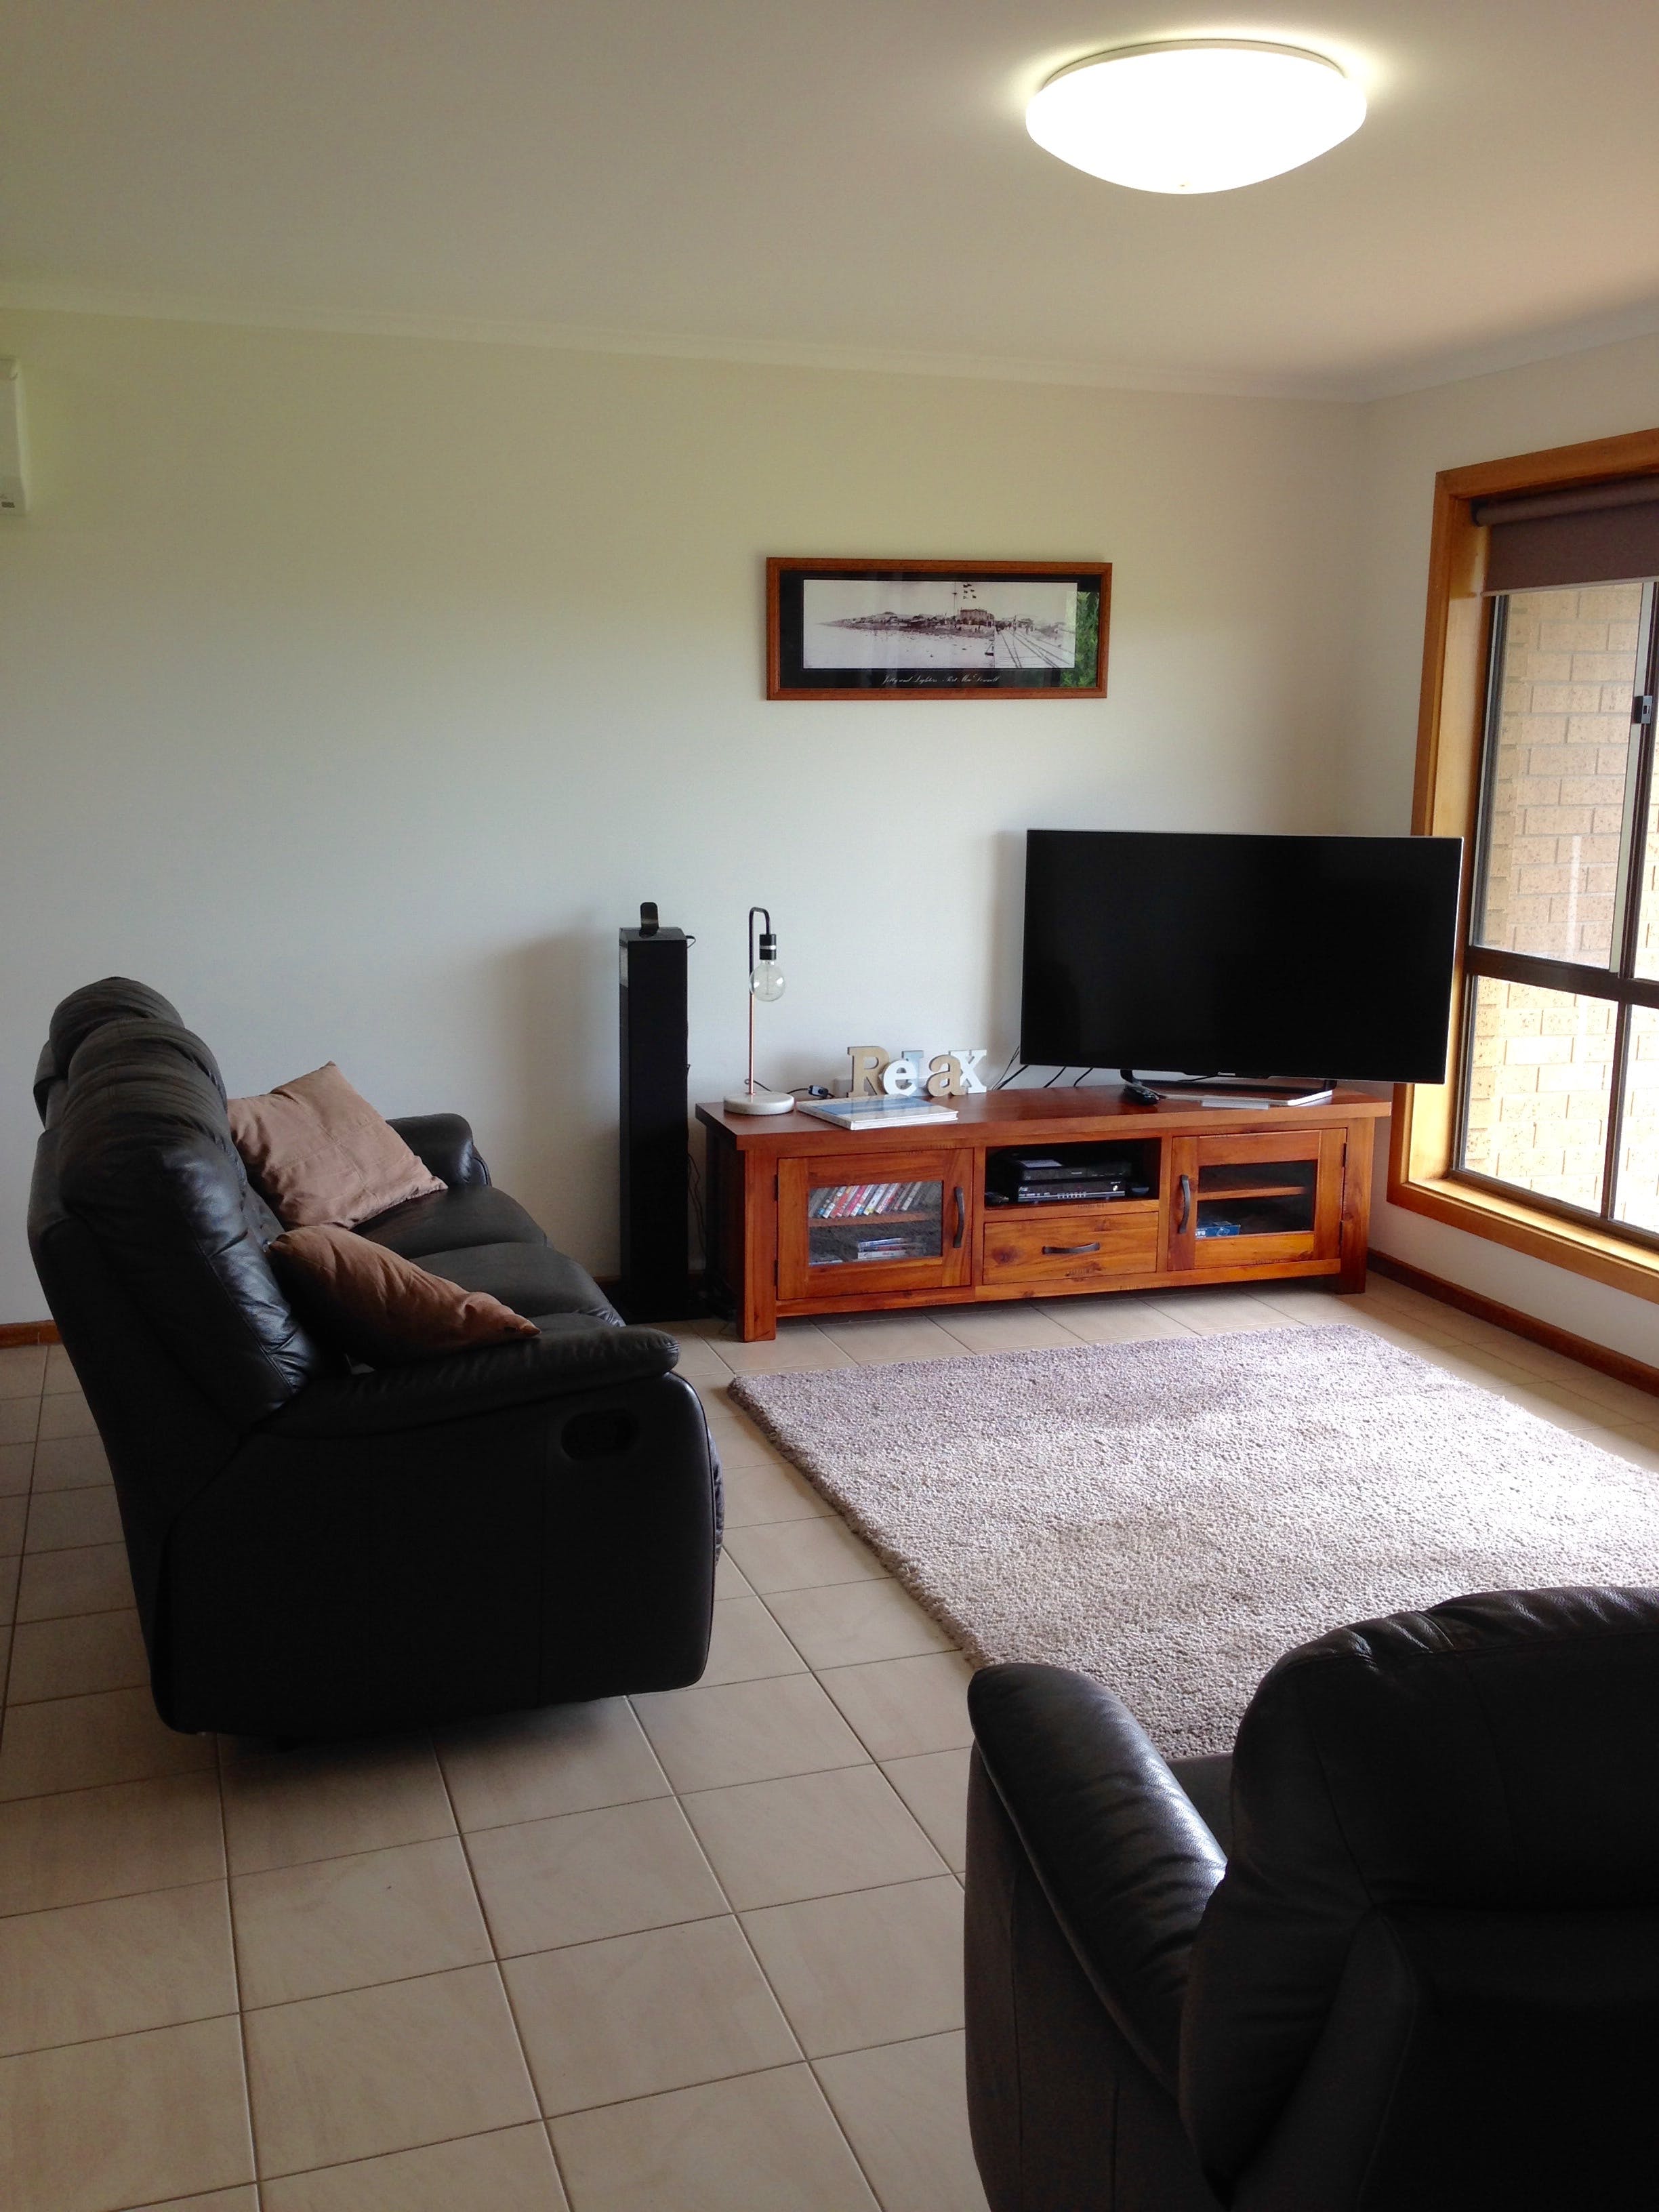 Springs Beach House - Accommodation Nelson Bay